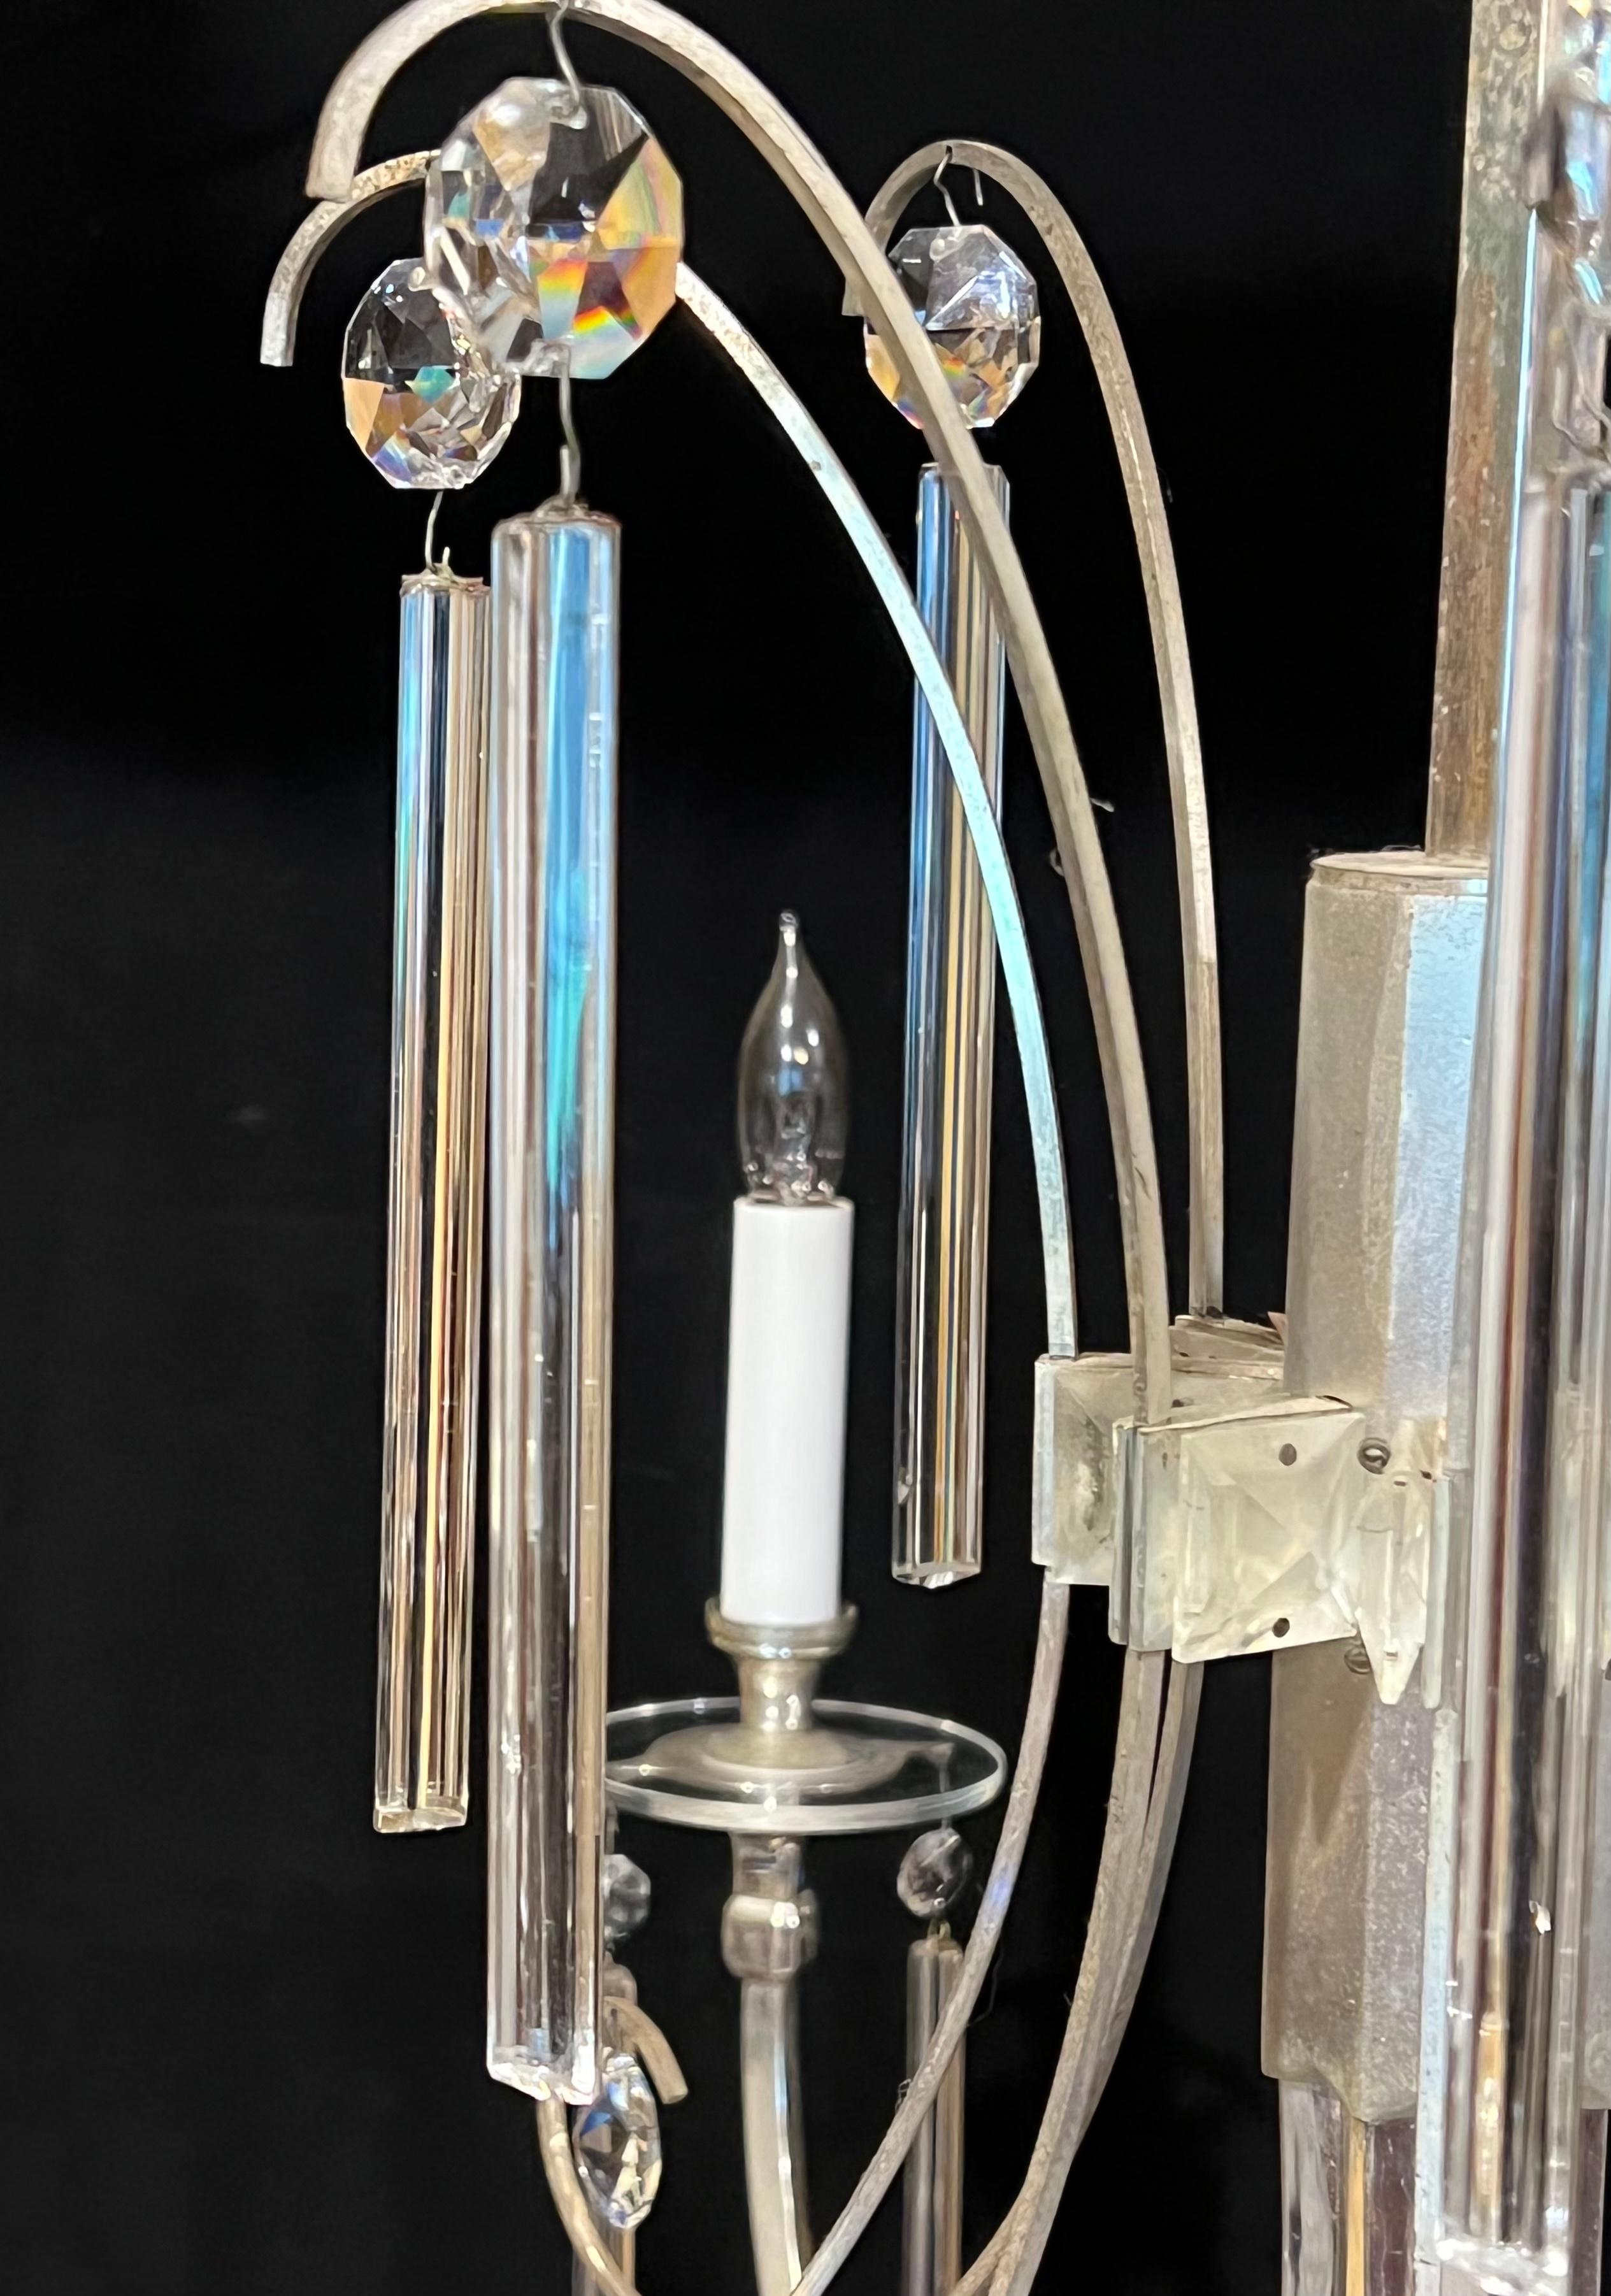 very rare silver plate and lead crystal Sciolari chandelier, Purchased in 1970 from original owner. Modern and elegant this chandelier has unique triangular pencil drops topped with faceted baguette crystals, Classical shape with very clean lines